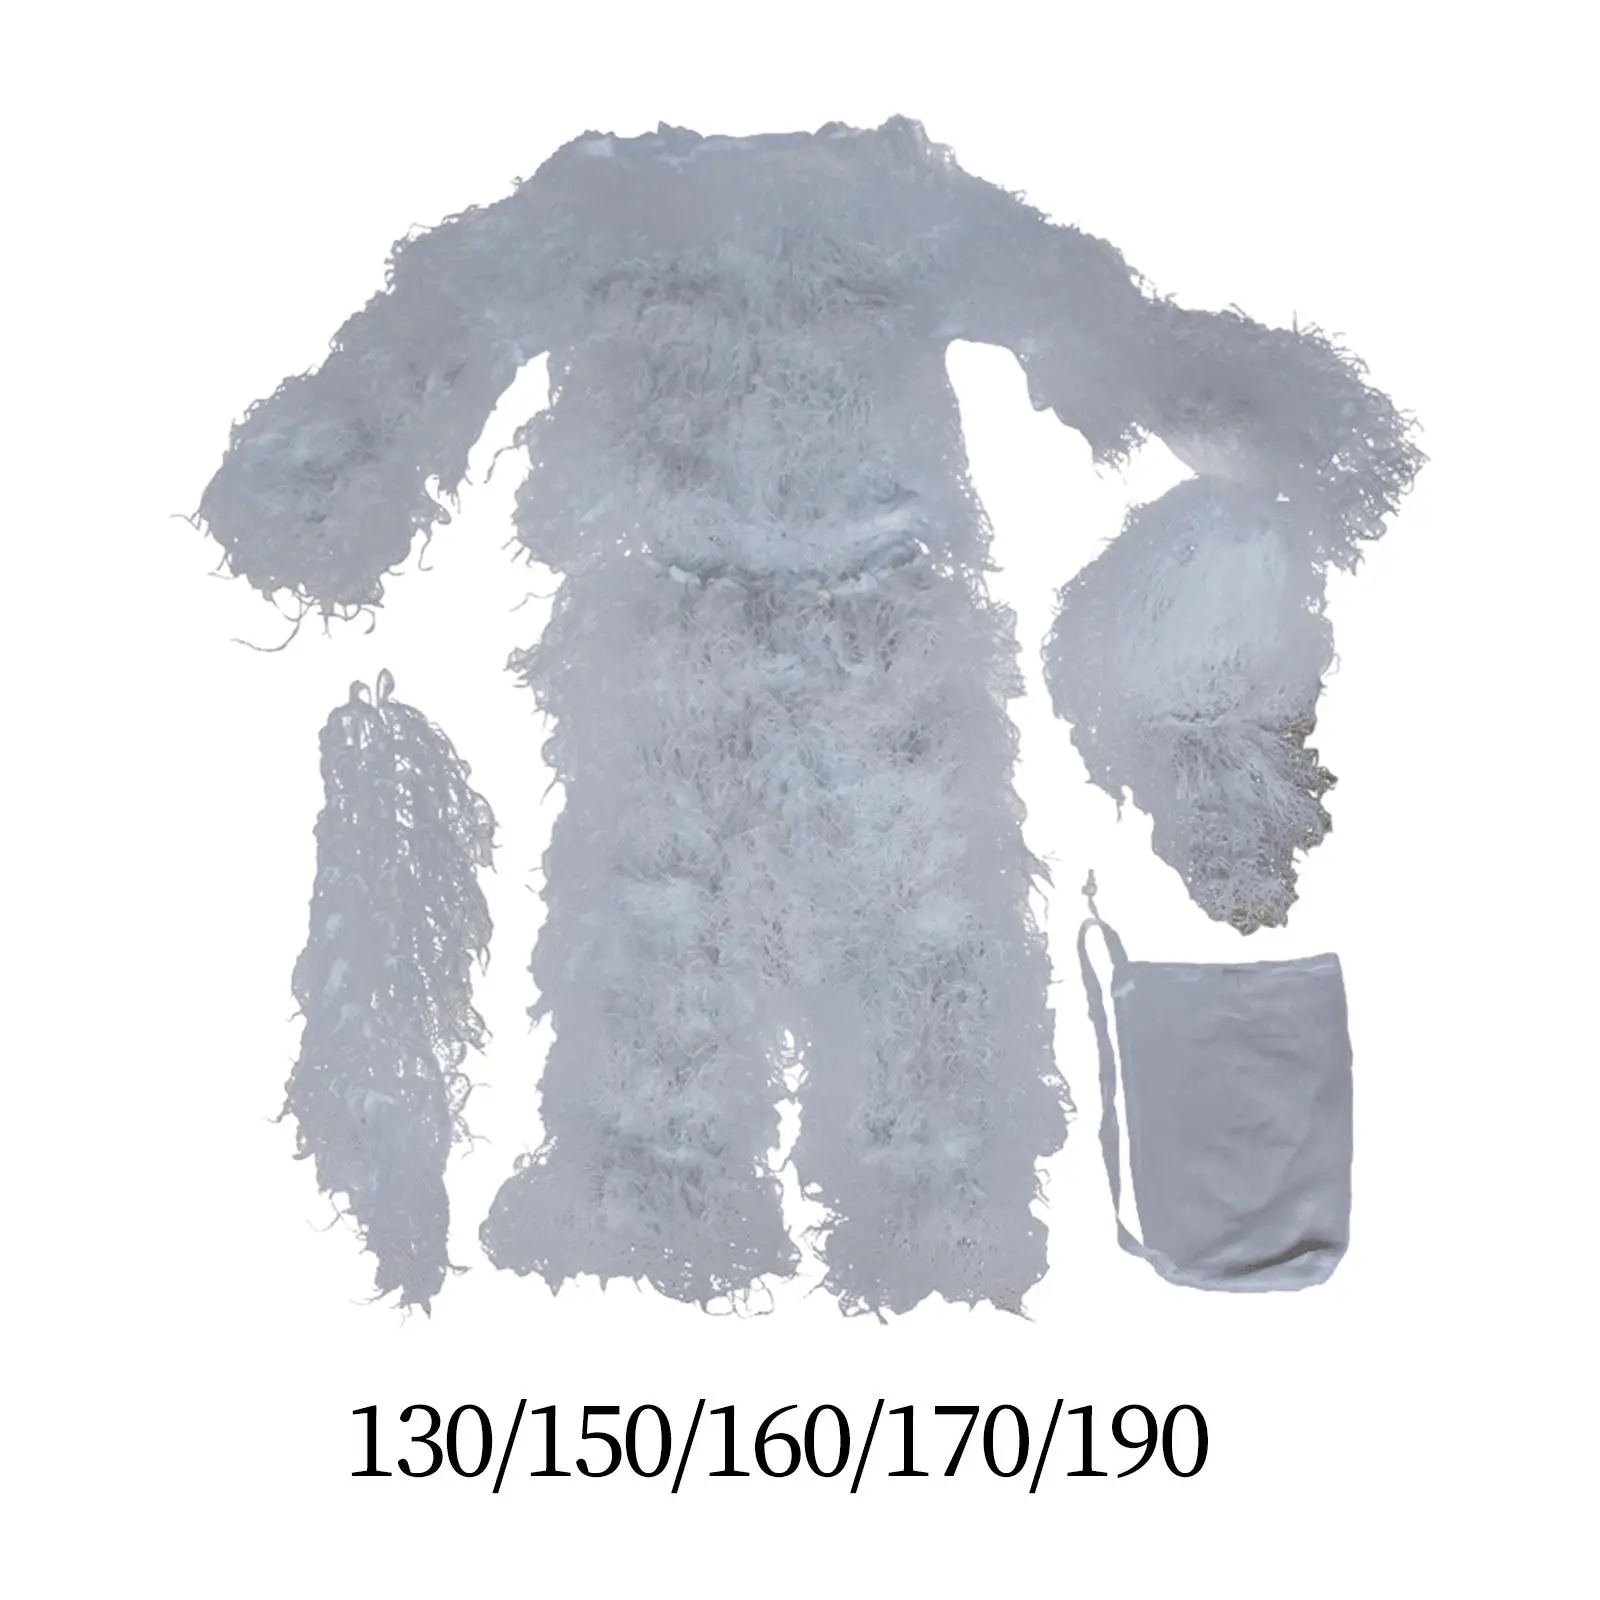 Ghillie Suit Snow Hunting Clothes for Kids Adults Clothing for Outdoor Game Hunting Photography Party Costume